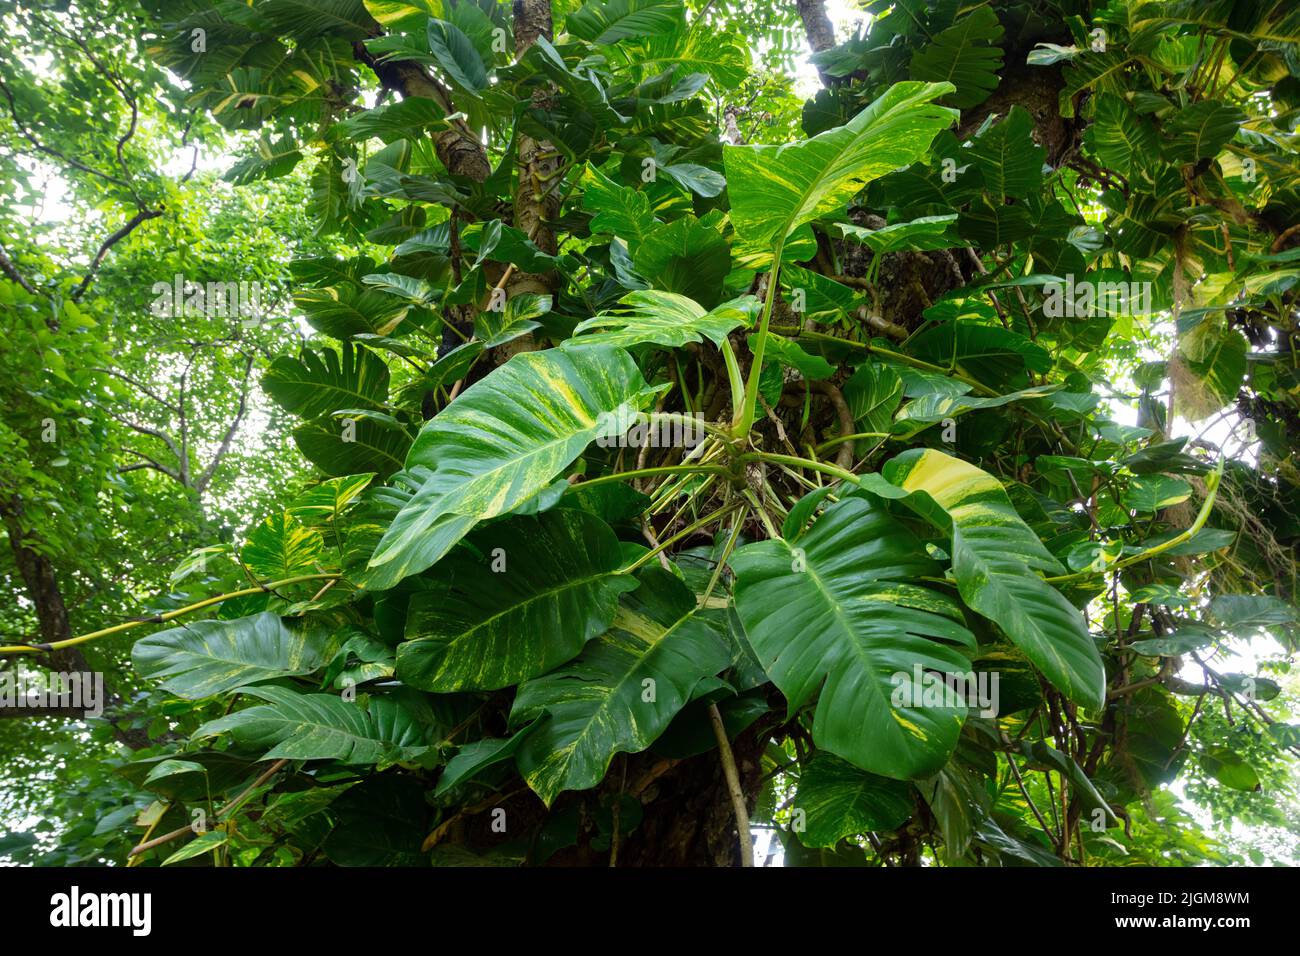 Araceae, Philodendreae, Philodendron vines on a tree in Srilanna National Park in Mae Taeng province not far from Chiang Mai, Thailand Stock Photo